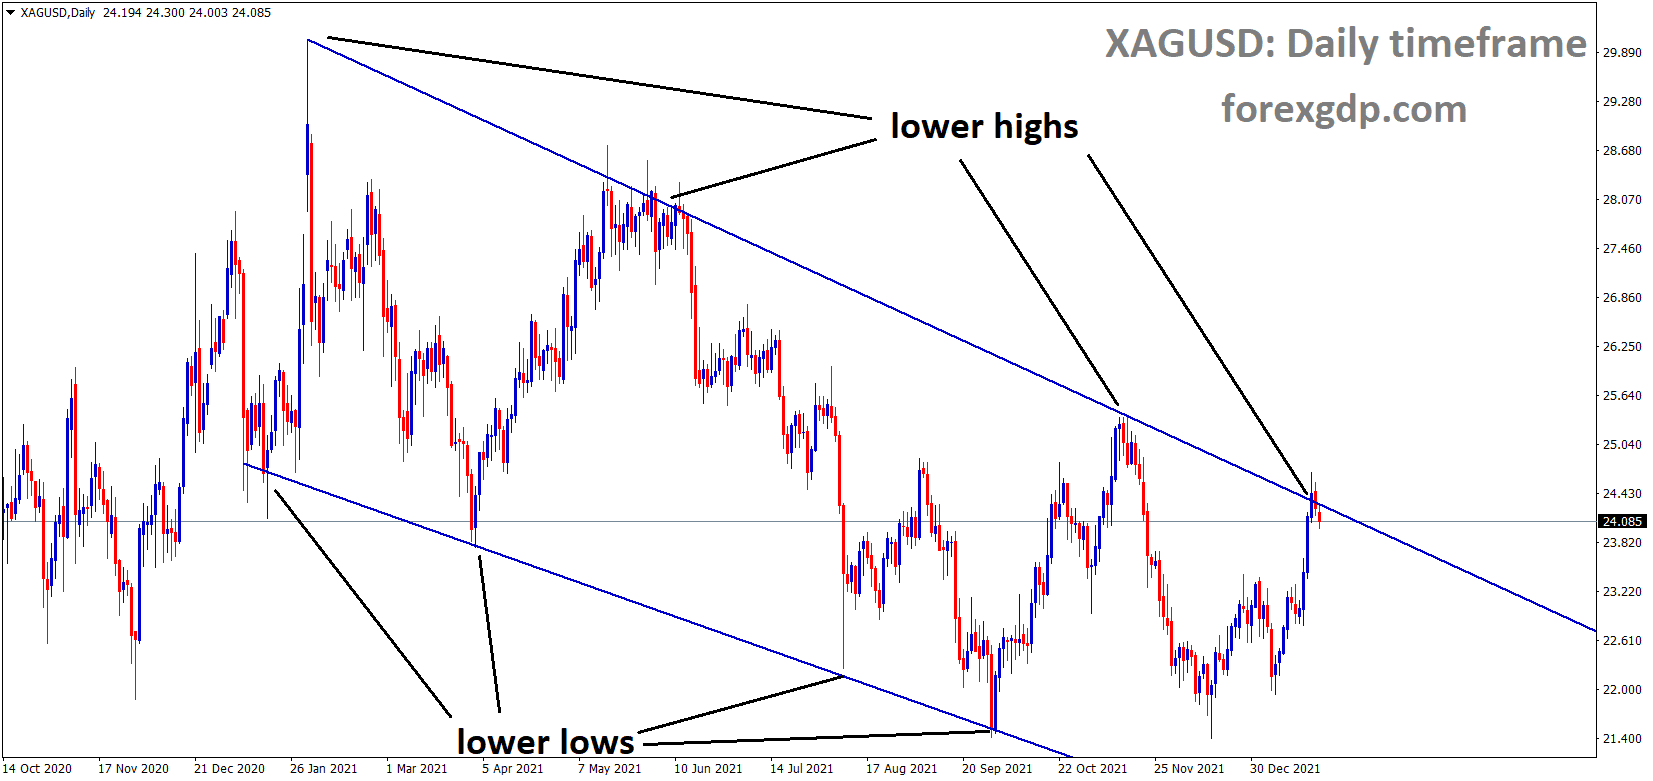 XAGUSD Silver price is moving in the Descending channel and the market has fallen from the lower high area of the channel